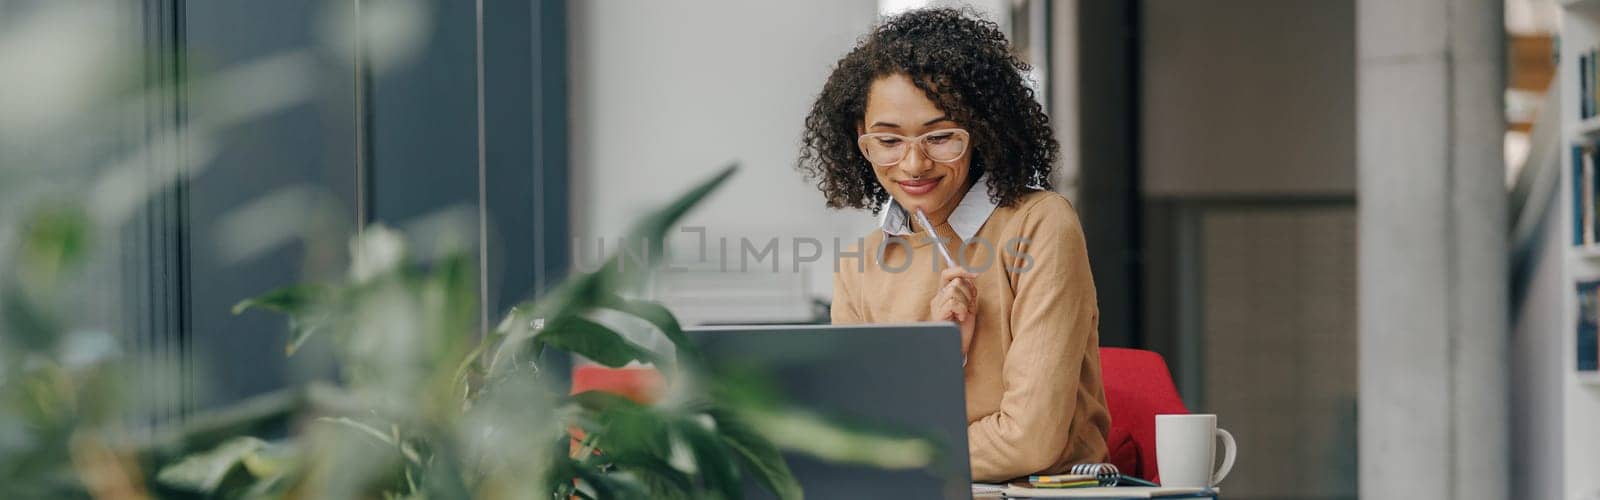 Stylish business woman in eyeglasses working on laptop while sitting in modern office near window